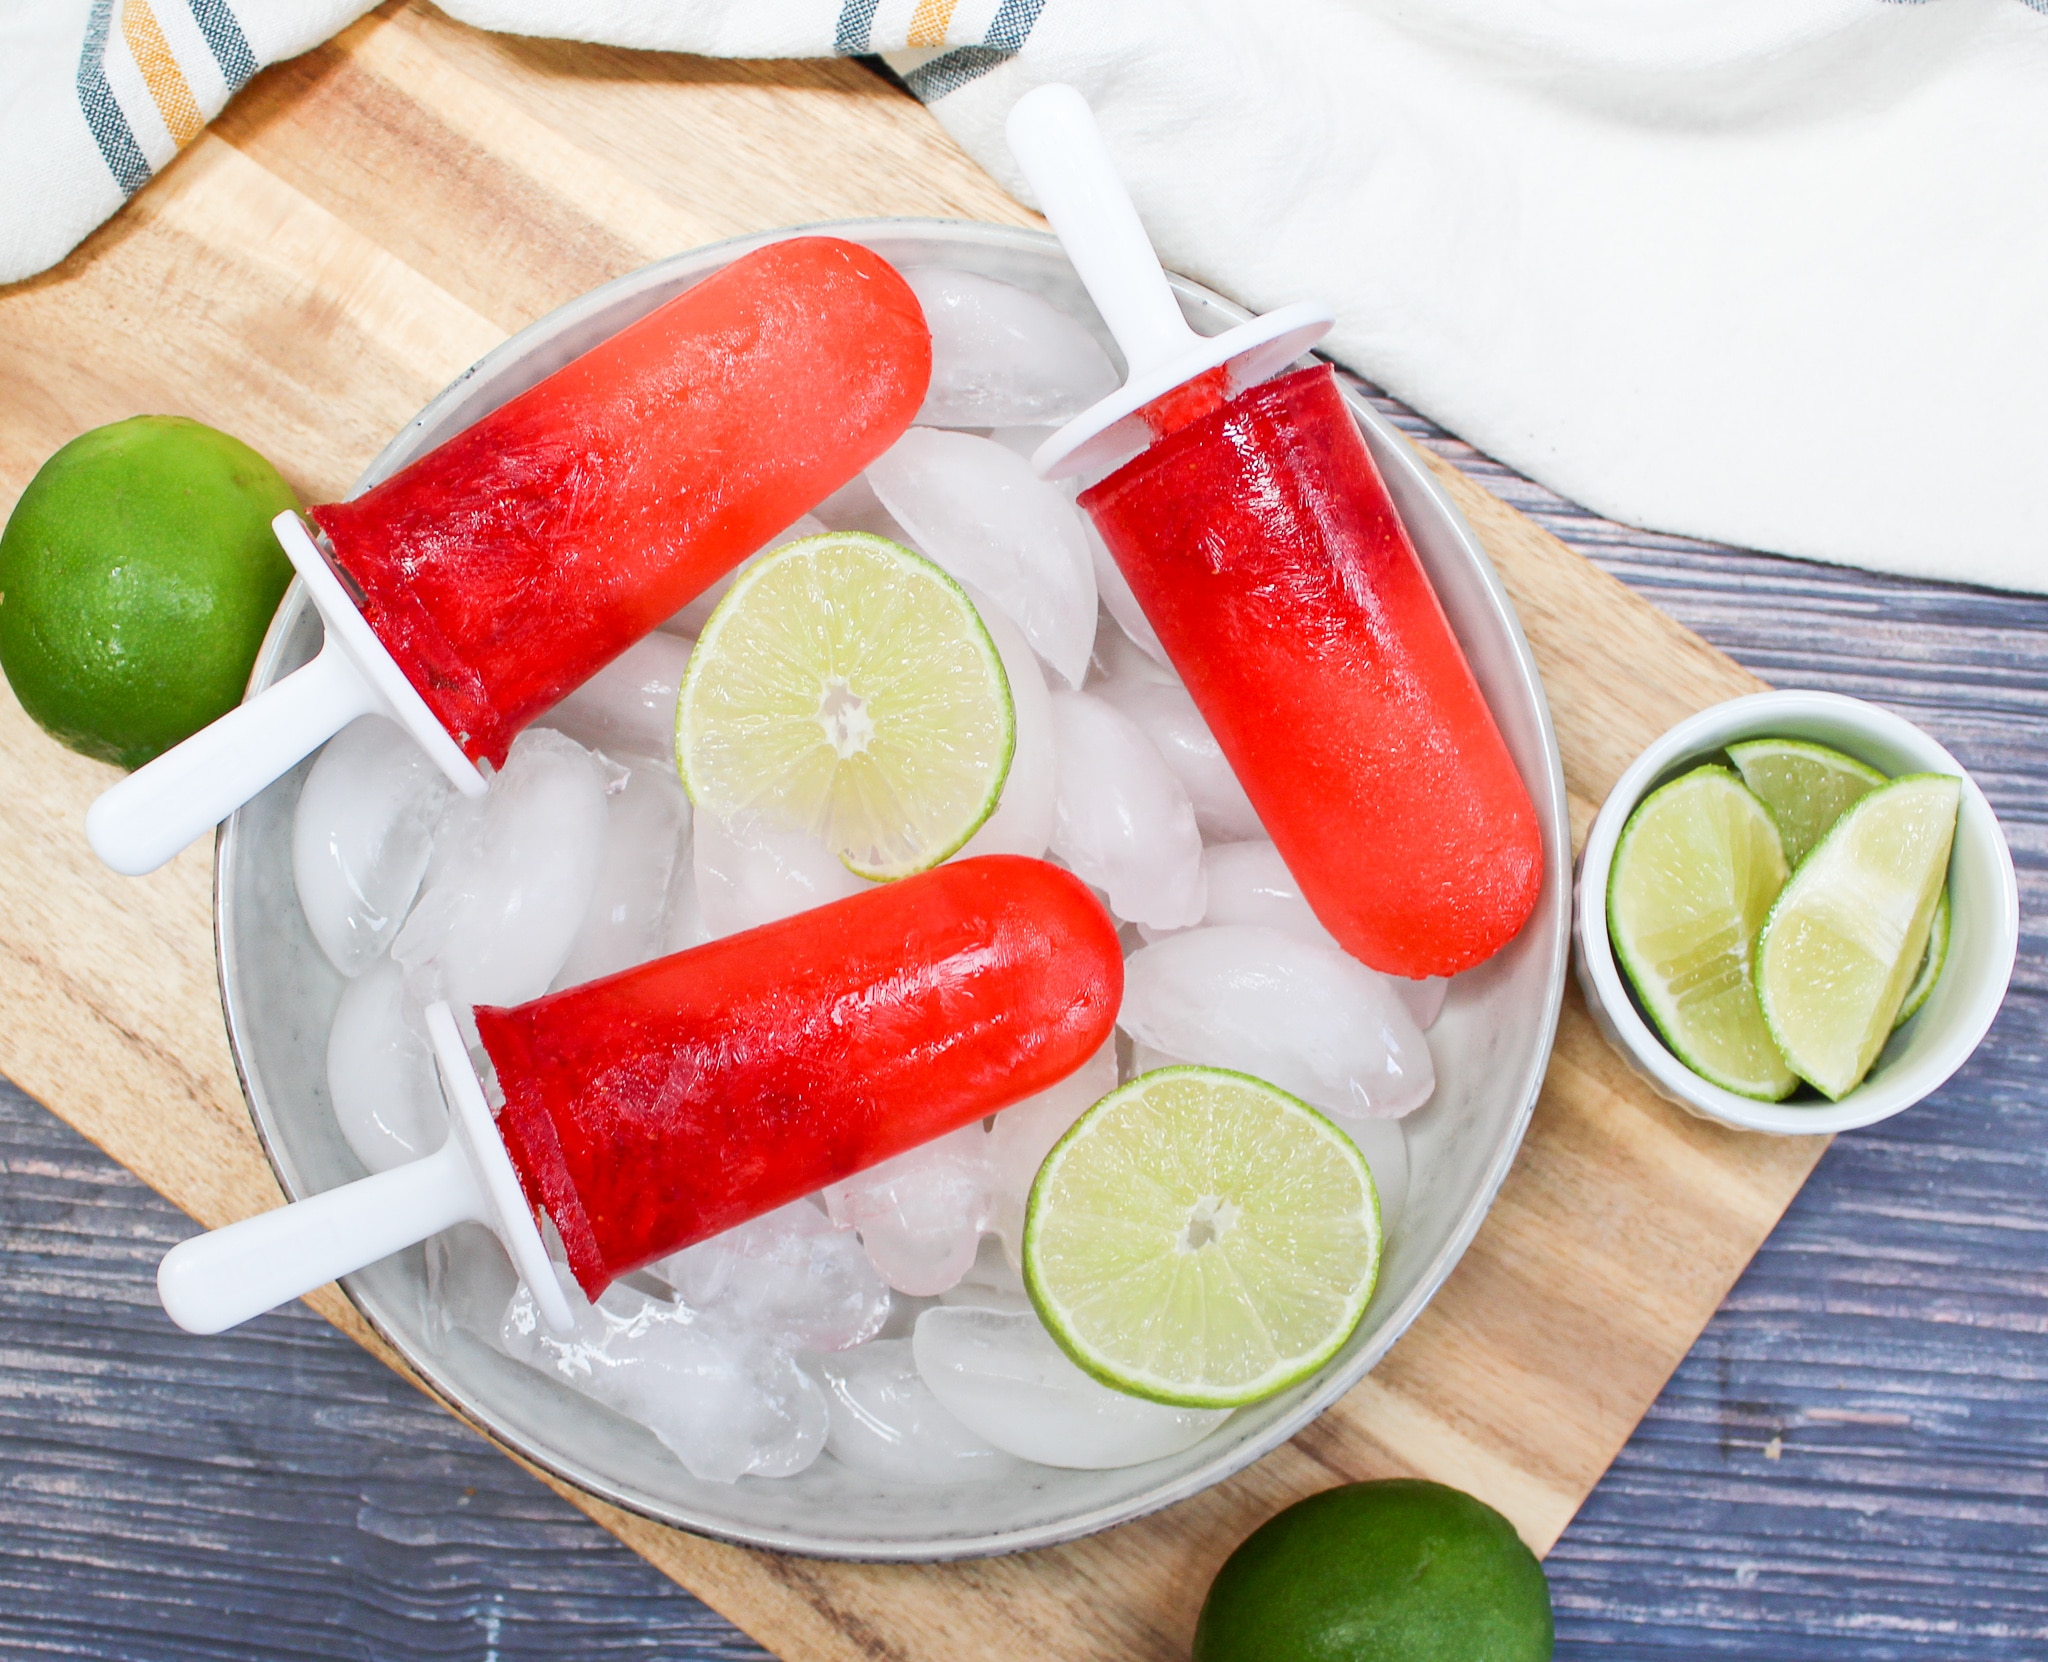 Strawberry Margarita Popsicle over ice with limes